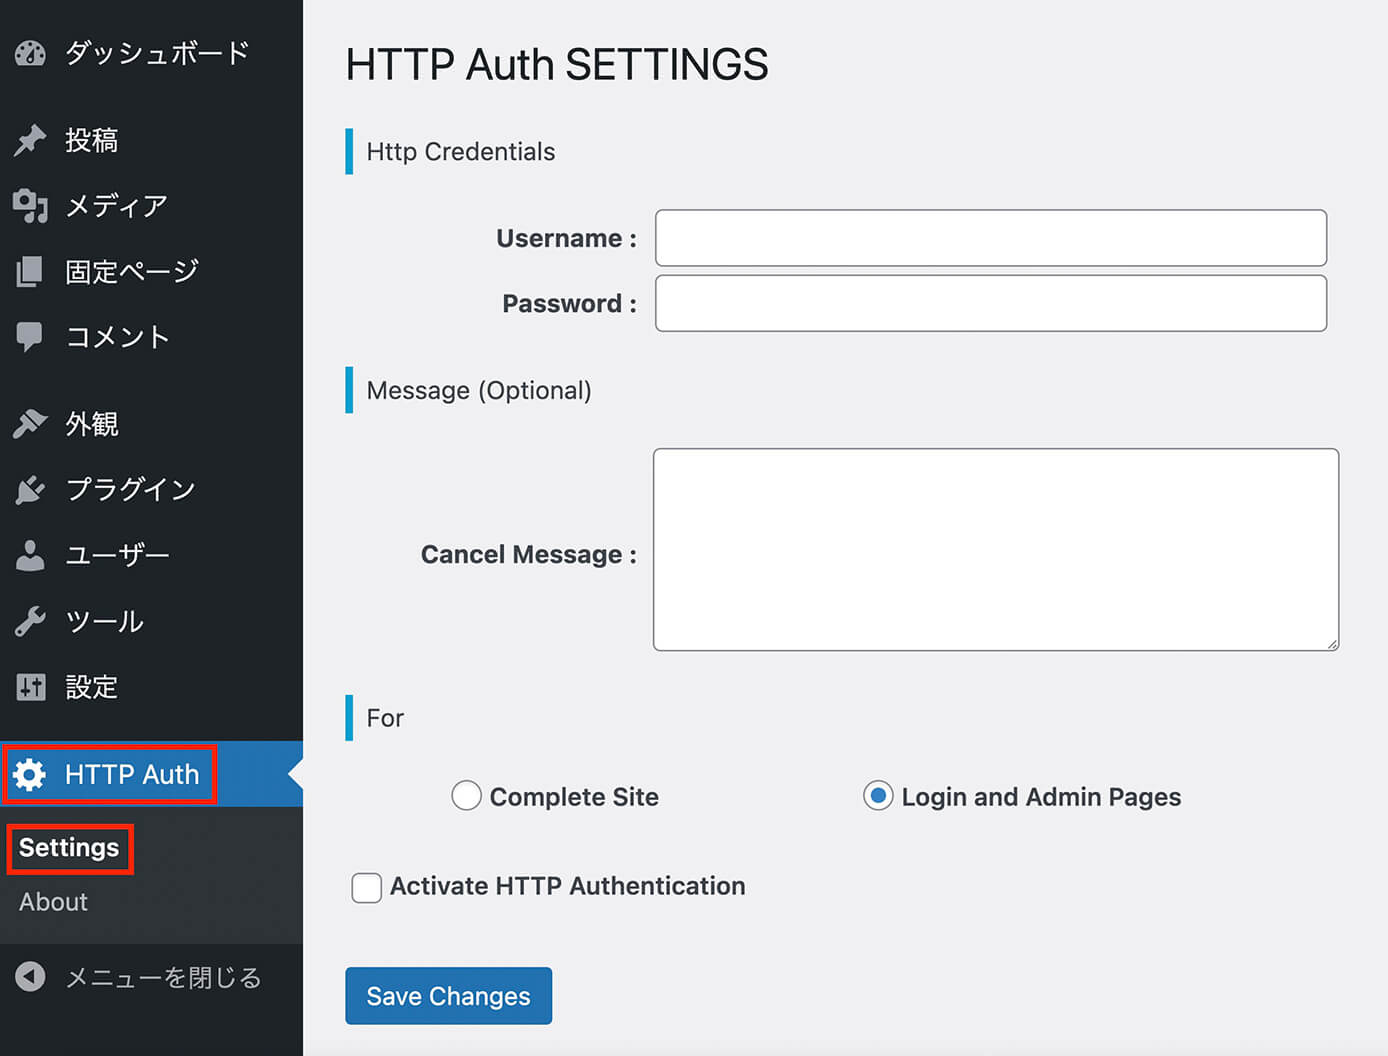 HTTP Auth → Settings